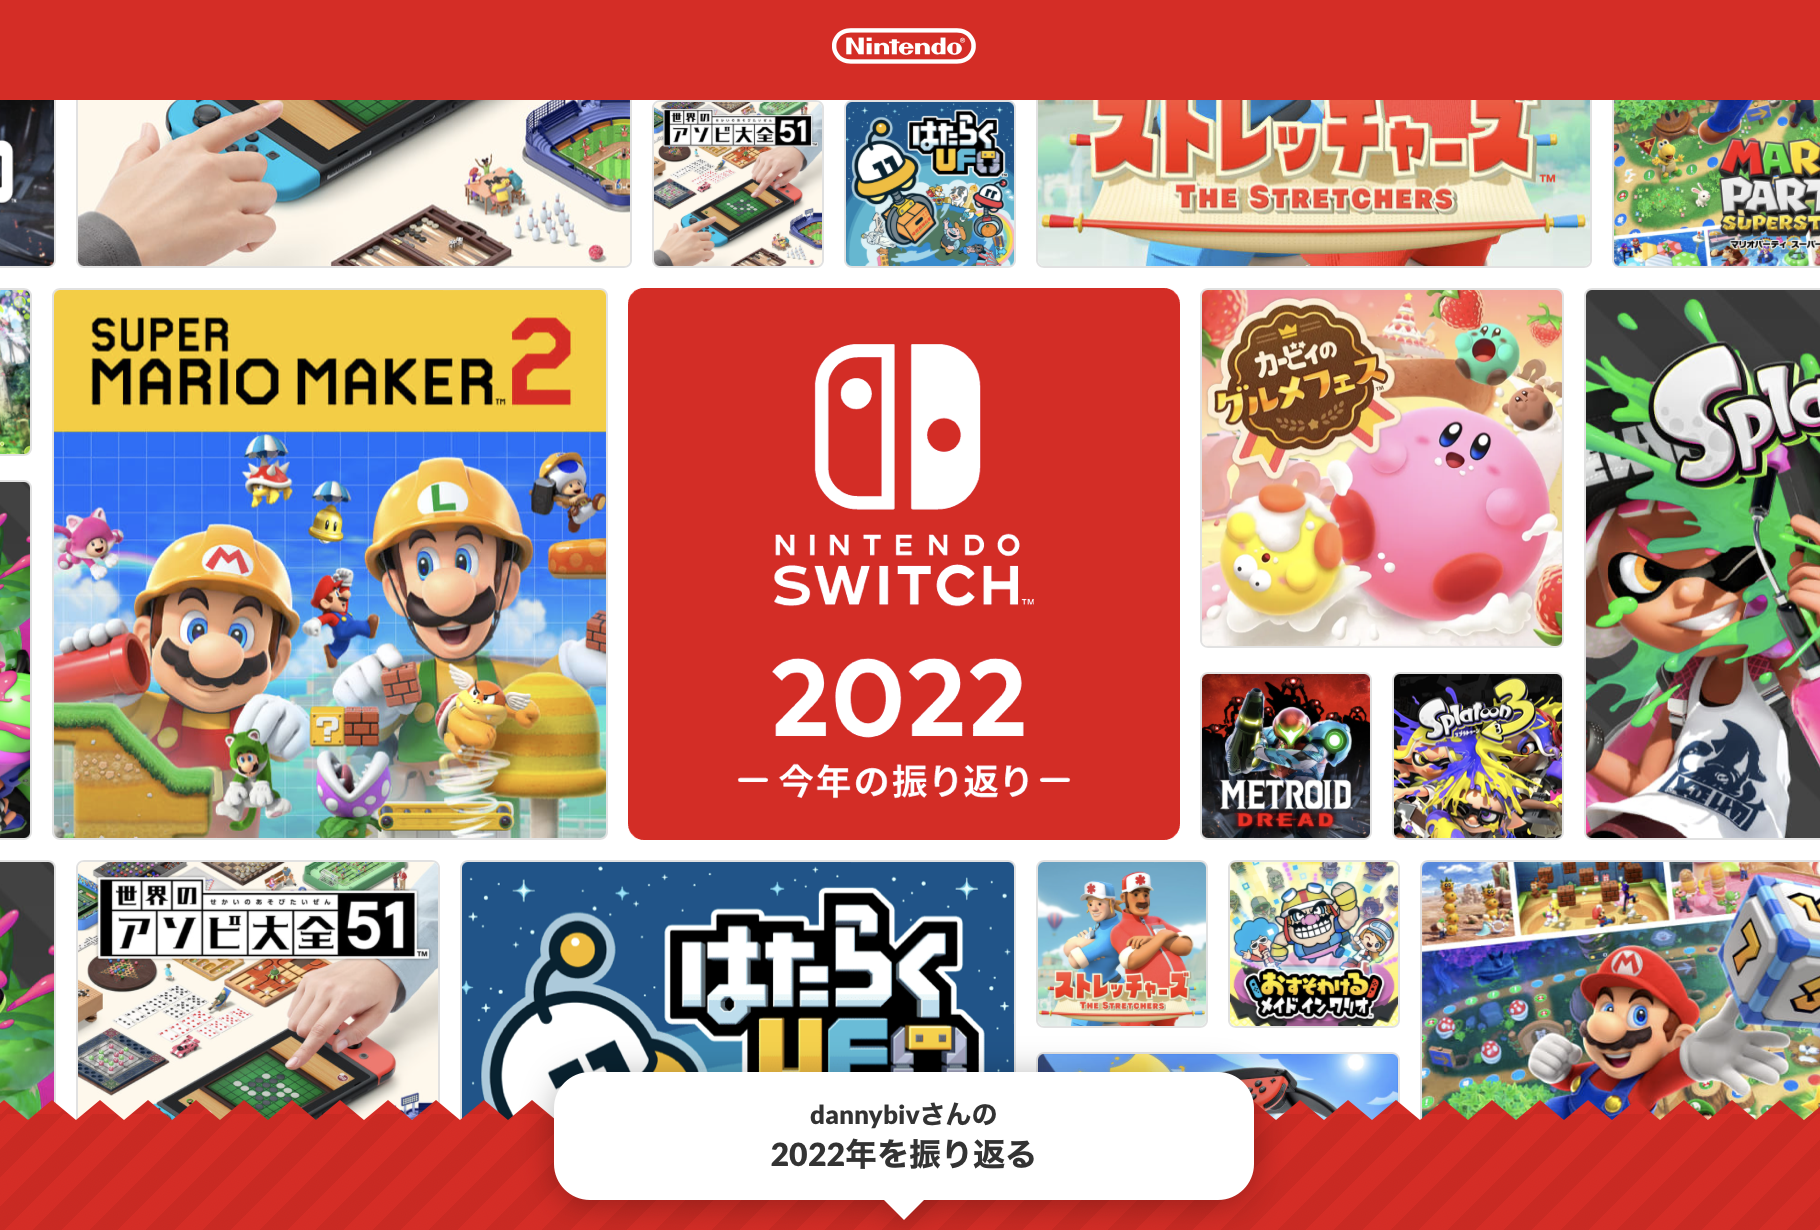 Nintendo Switch 2022 Year In Review Live in Japan TheFamicast.com: Japan-based Nintendo Videos